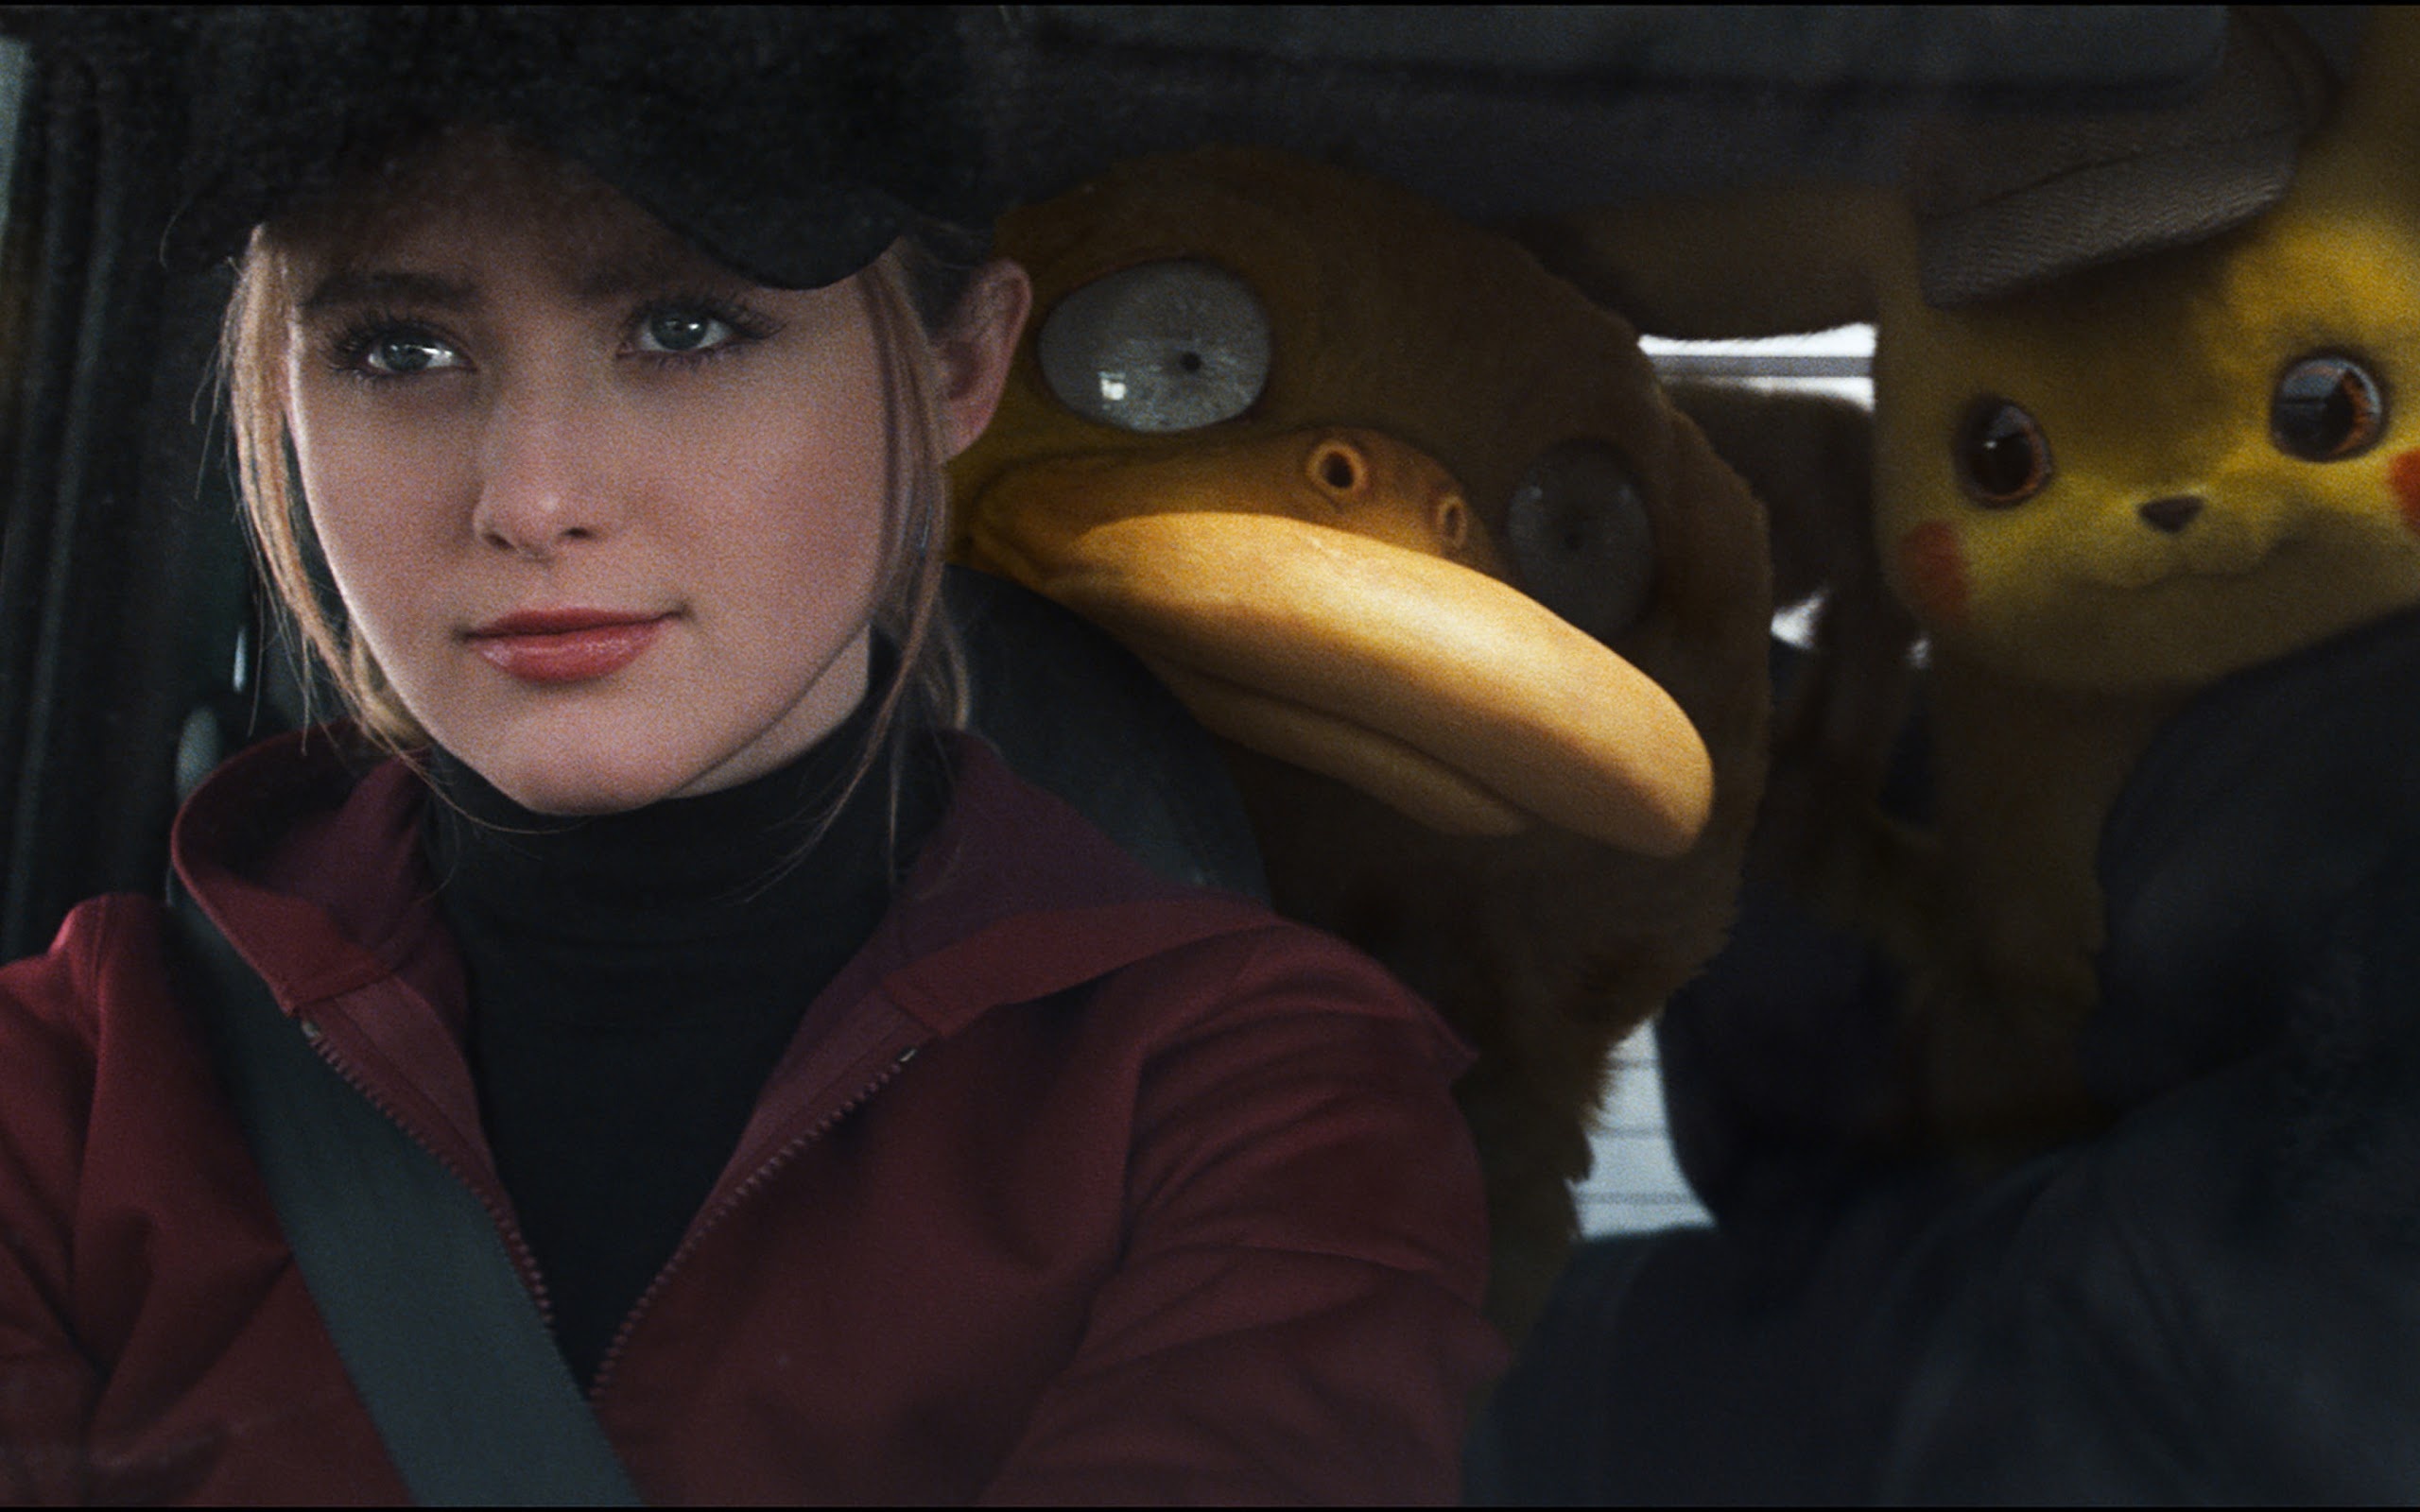 Pokemon Detective Pikachu: Kathryn Newton as Lucy Stevens, a junior reporter who is accompanied by a Psyduck. 2560x1600 HD Wallpaper.